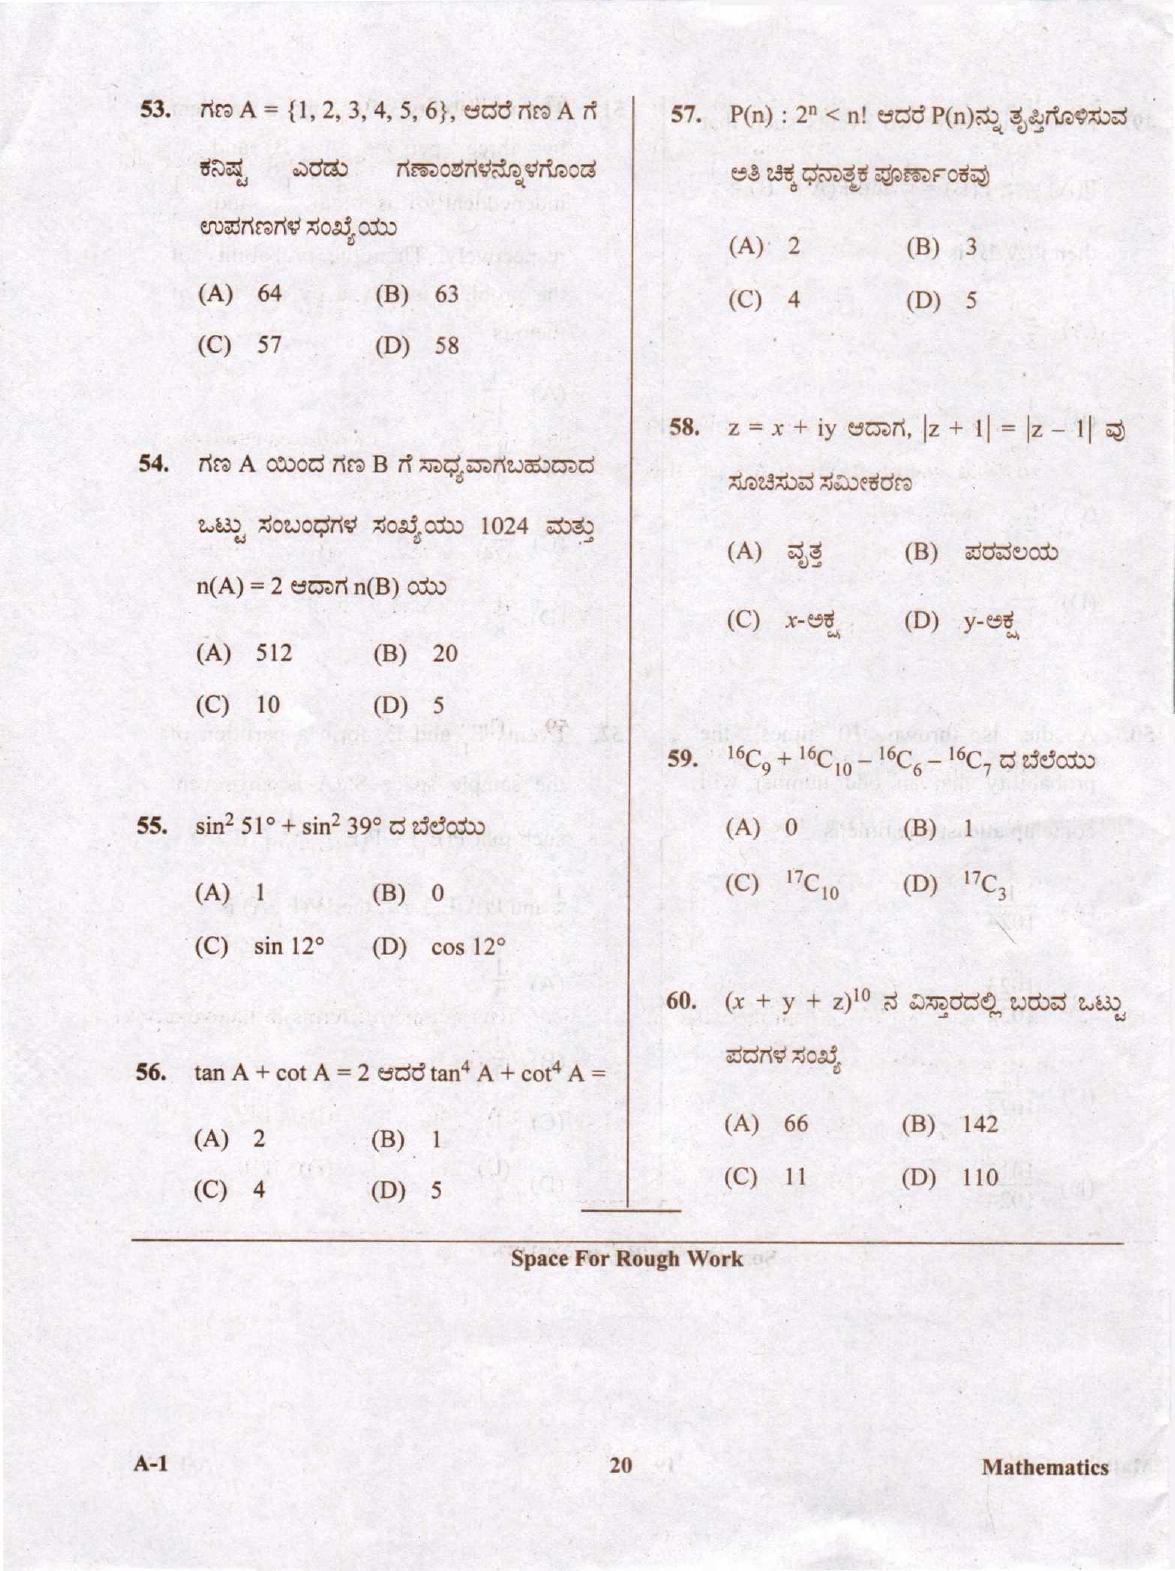 KCET Mathematics 2020 Question Papers - Page 20